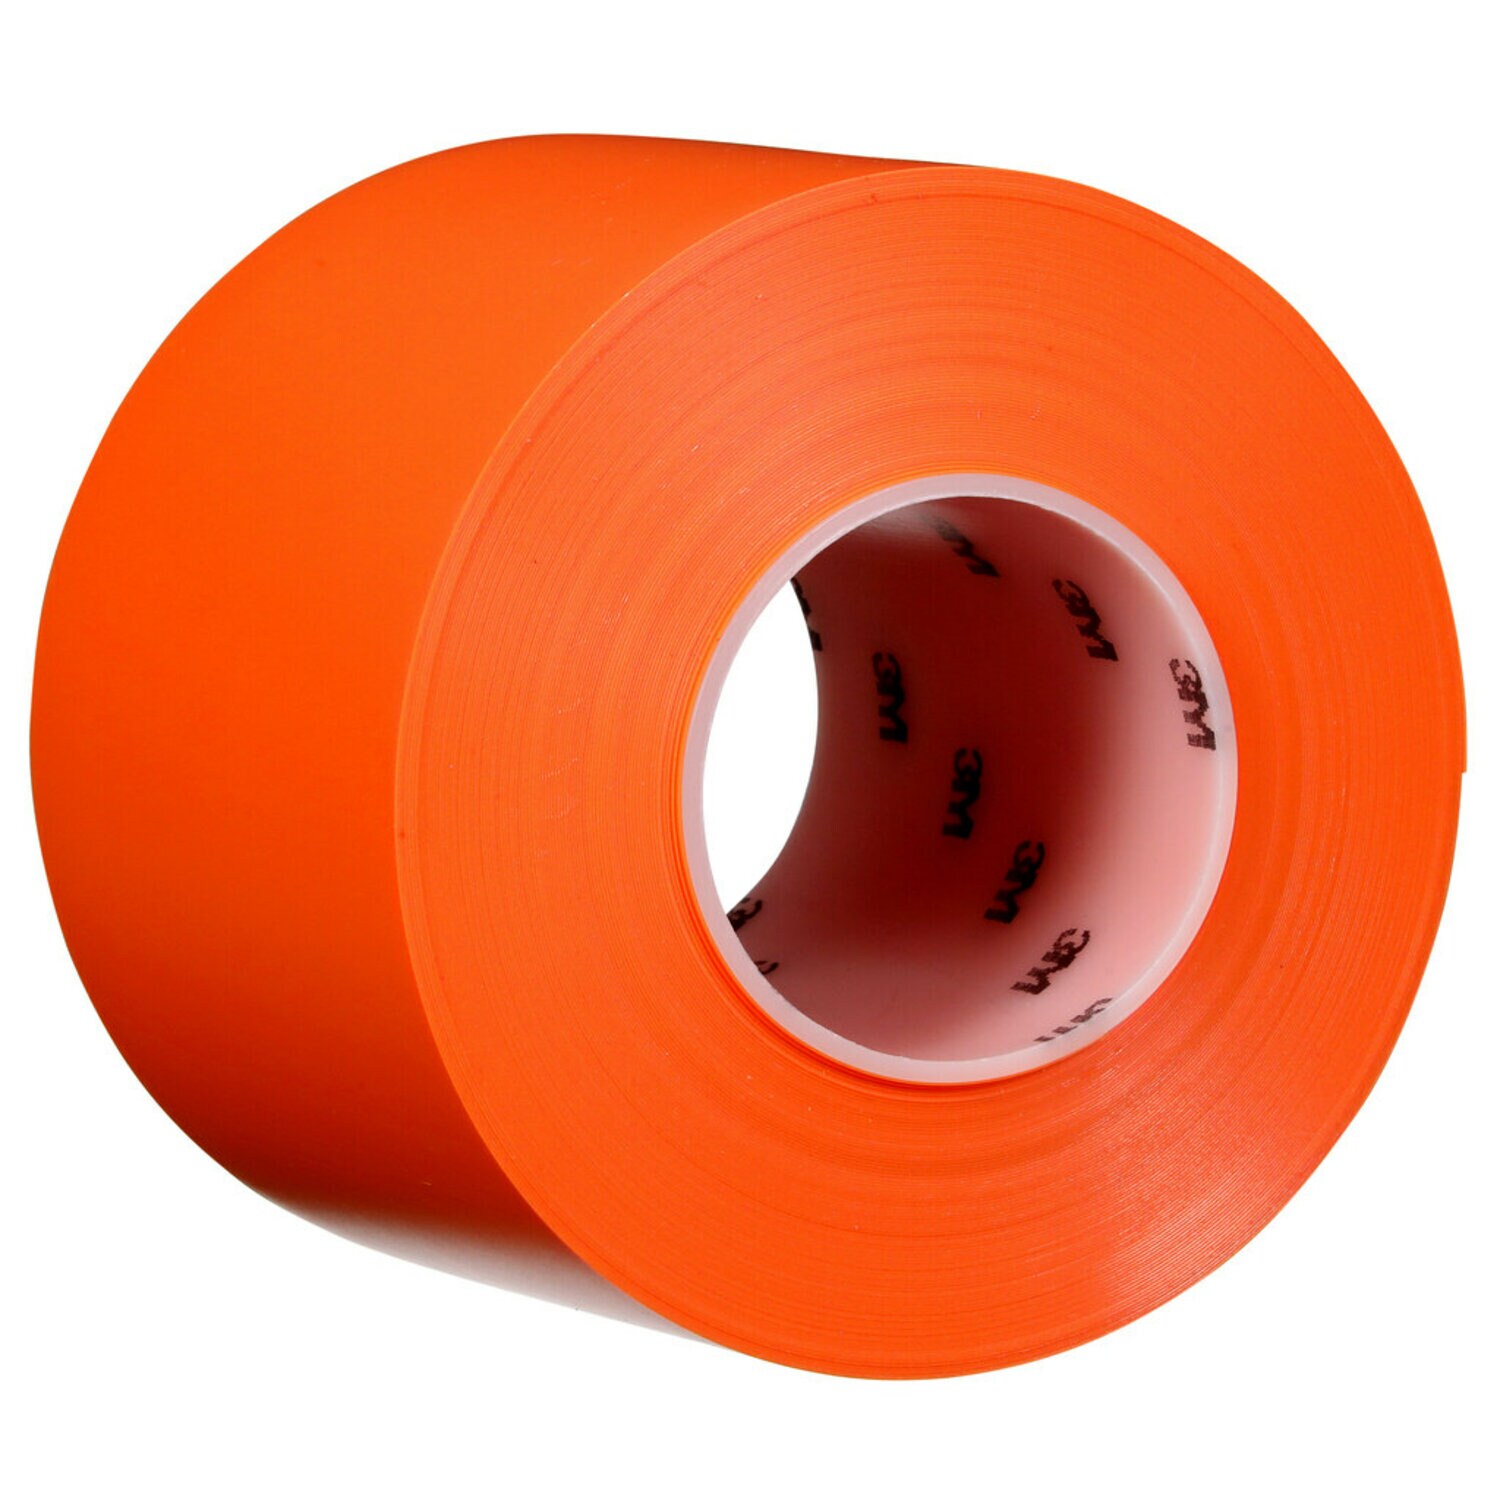 7100260625 - 3M Durable Floor Marking Tape 971, Orange, 4 in x 36 yd, 17 mil, 3 Rolls/Case, Individually Wrapped Conveniently Packaged